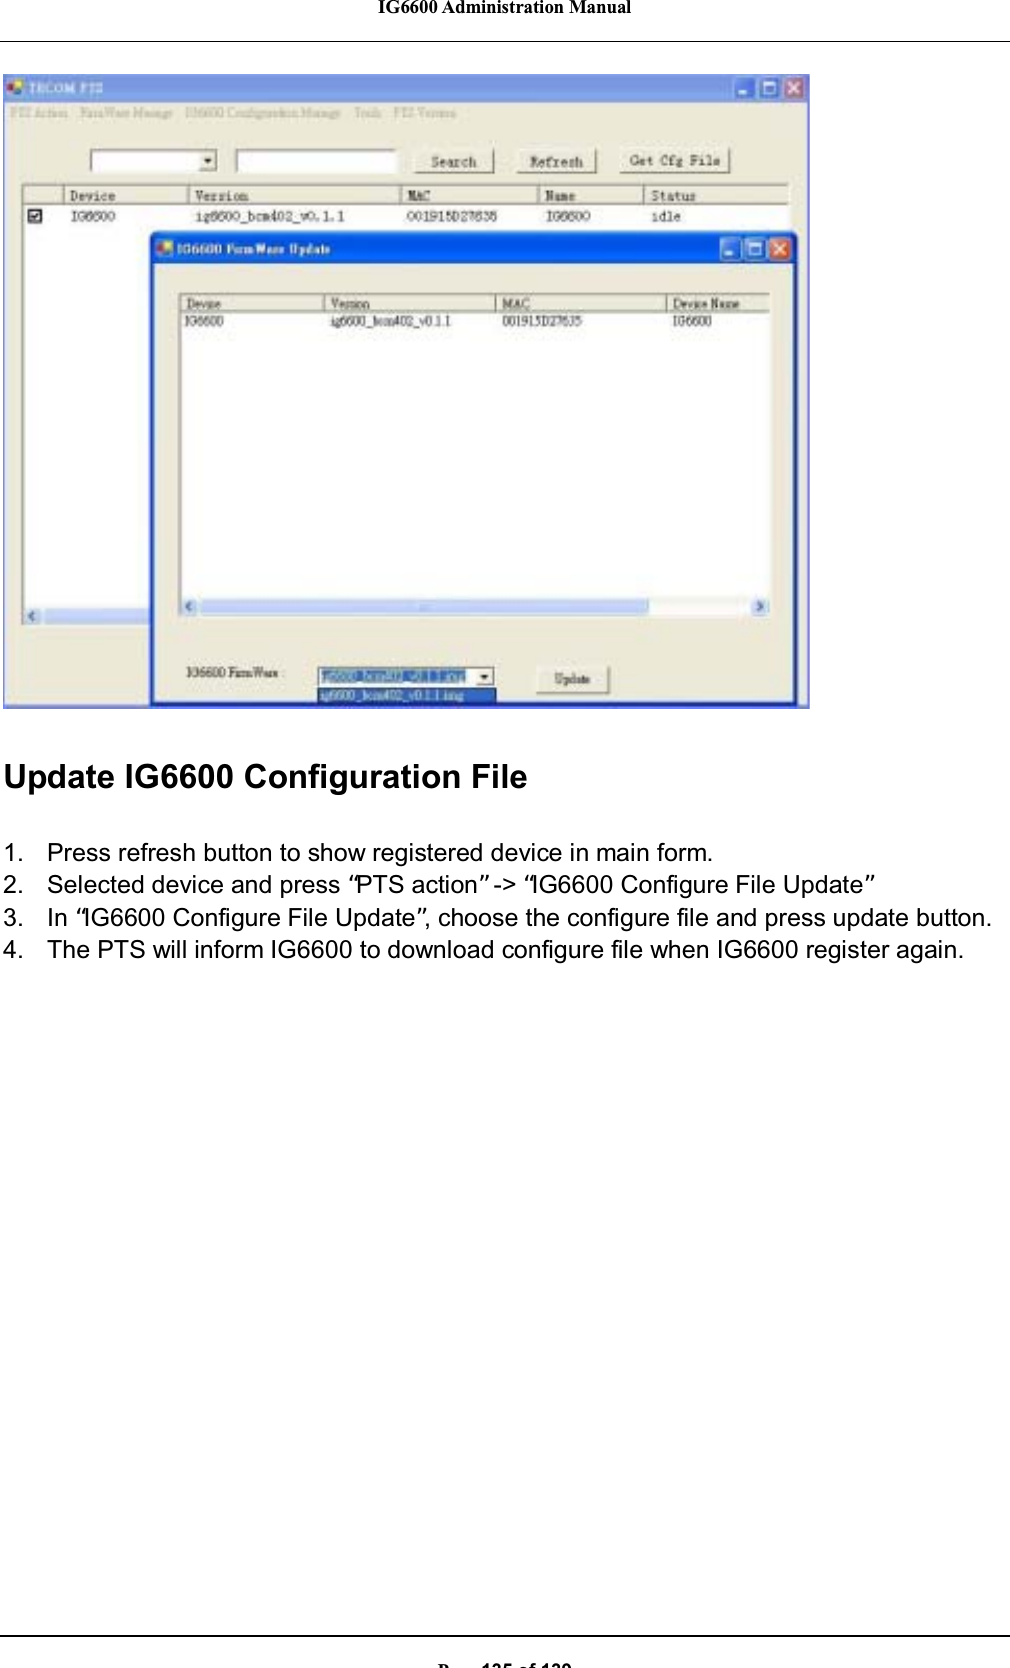 IG6600 Administration ManualP135of139Update IG6600 Configuration File1. Press refresh button to show registered device in main form.2. Selected device and press “PTS action”-&gt; “IG6600 Configure File Update”3. In “IG6600 Configure File Update”, choose the configure file and press update button.4. The PTS will inform IG6600 to download configure file when IG6600 register again.